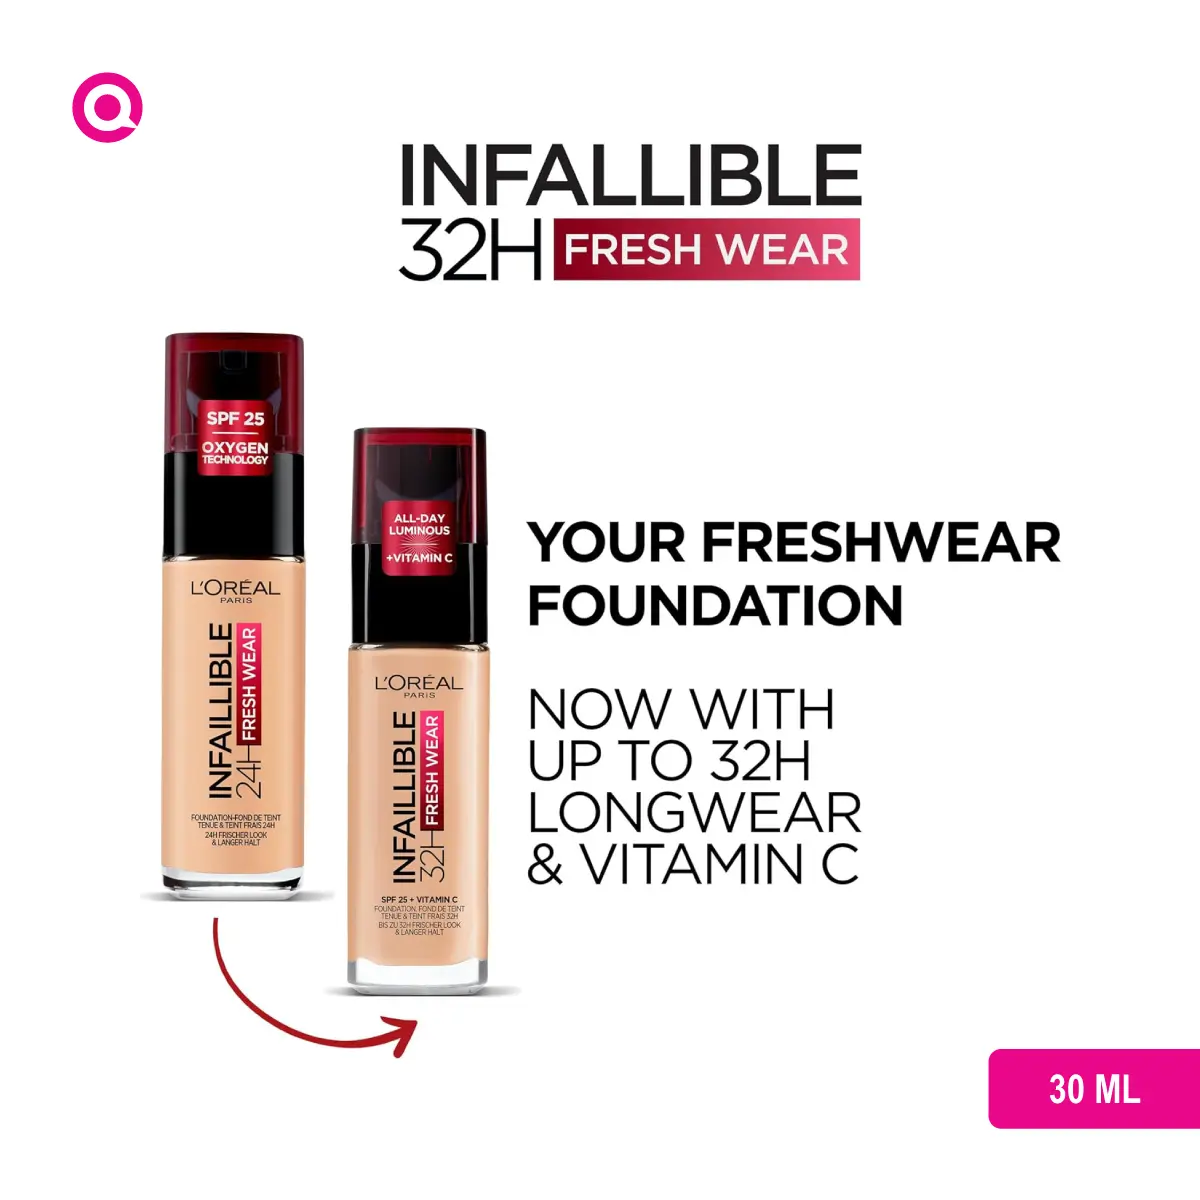 L'Oreal Infaillible 32H Fresh Wear Foundation - 200 NATURAL LINEN product image-02